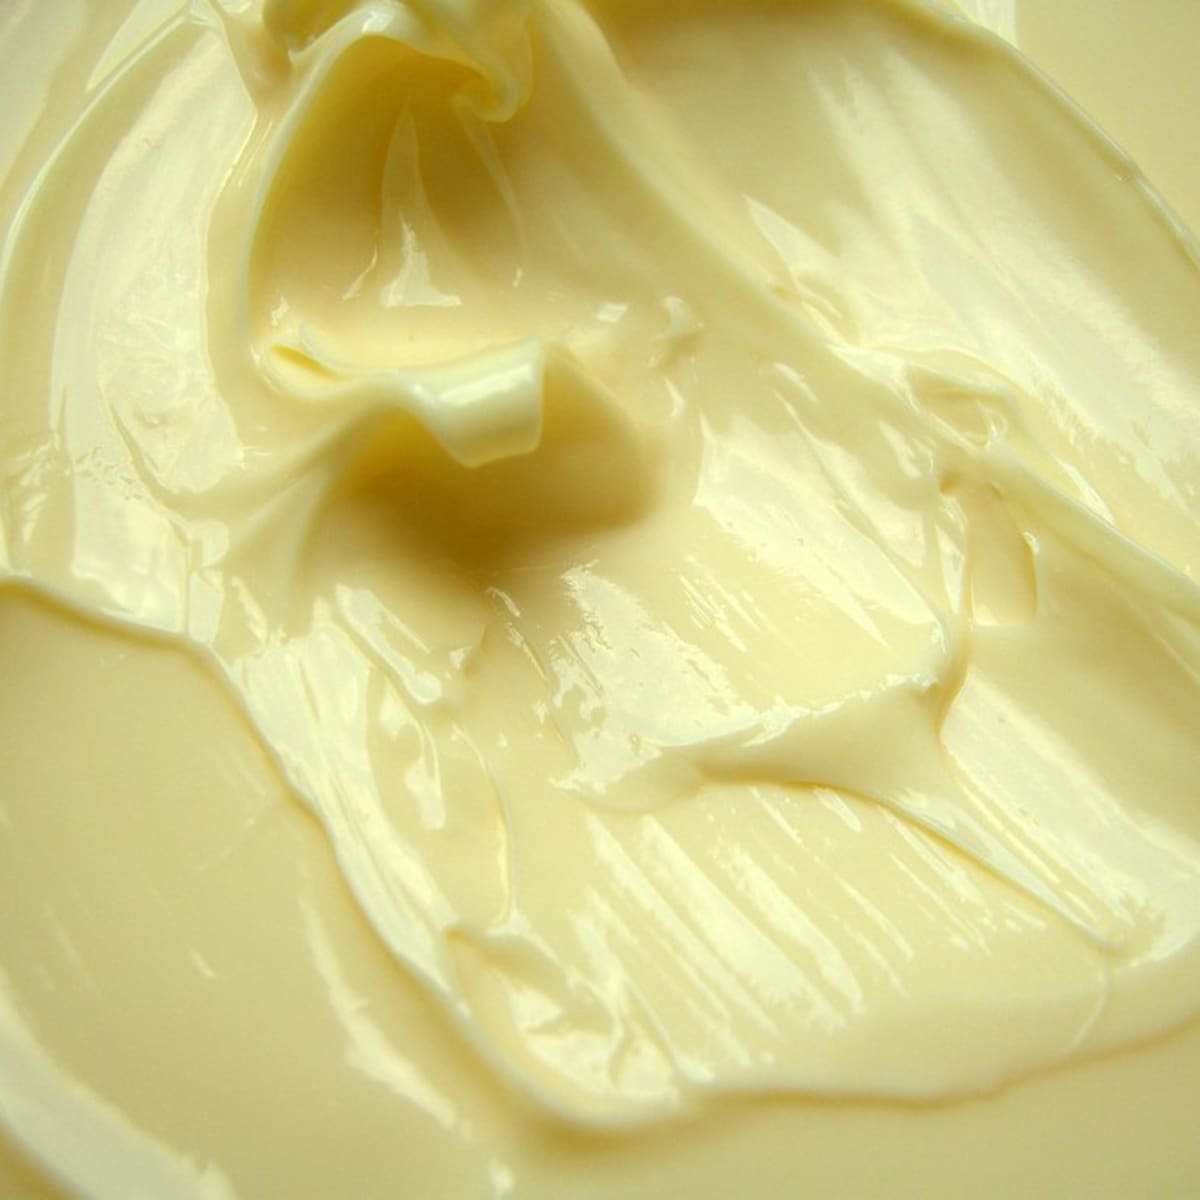 The Ultimate Body Butter Recipe image